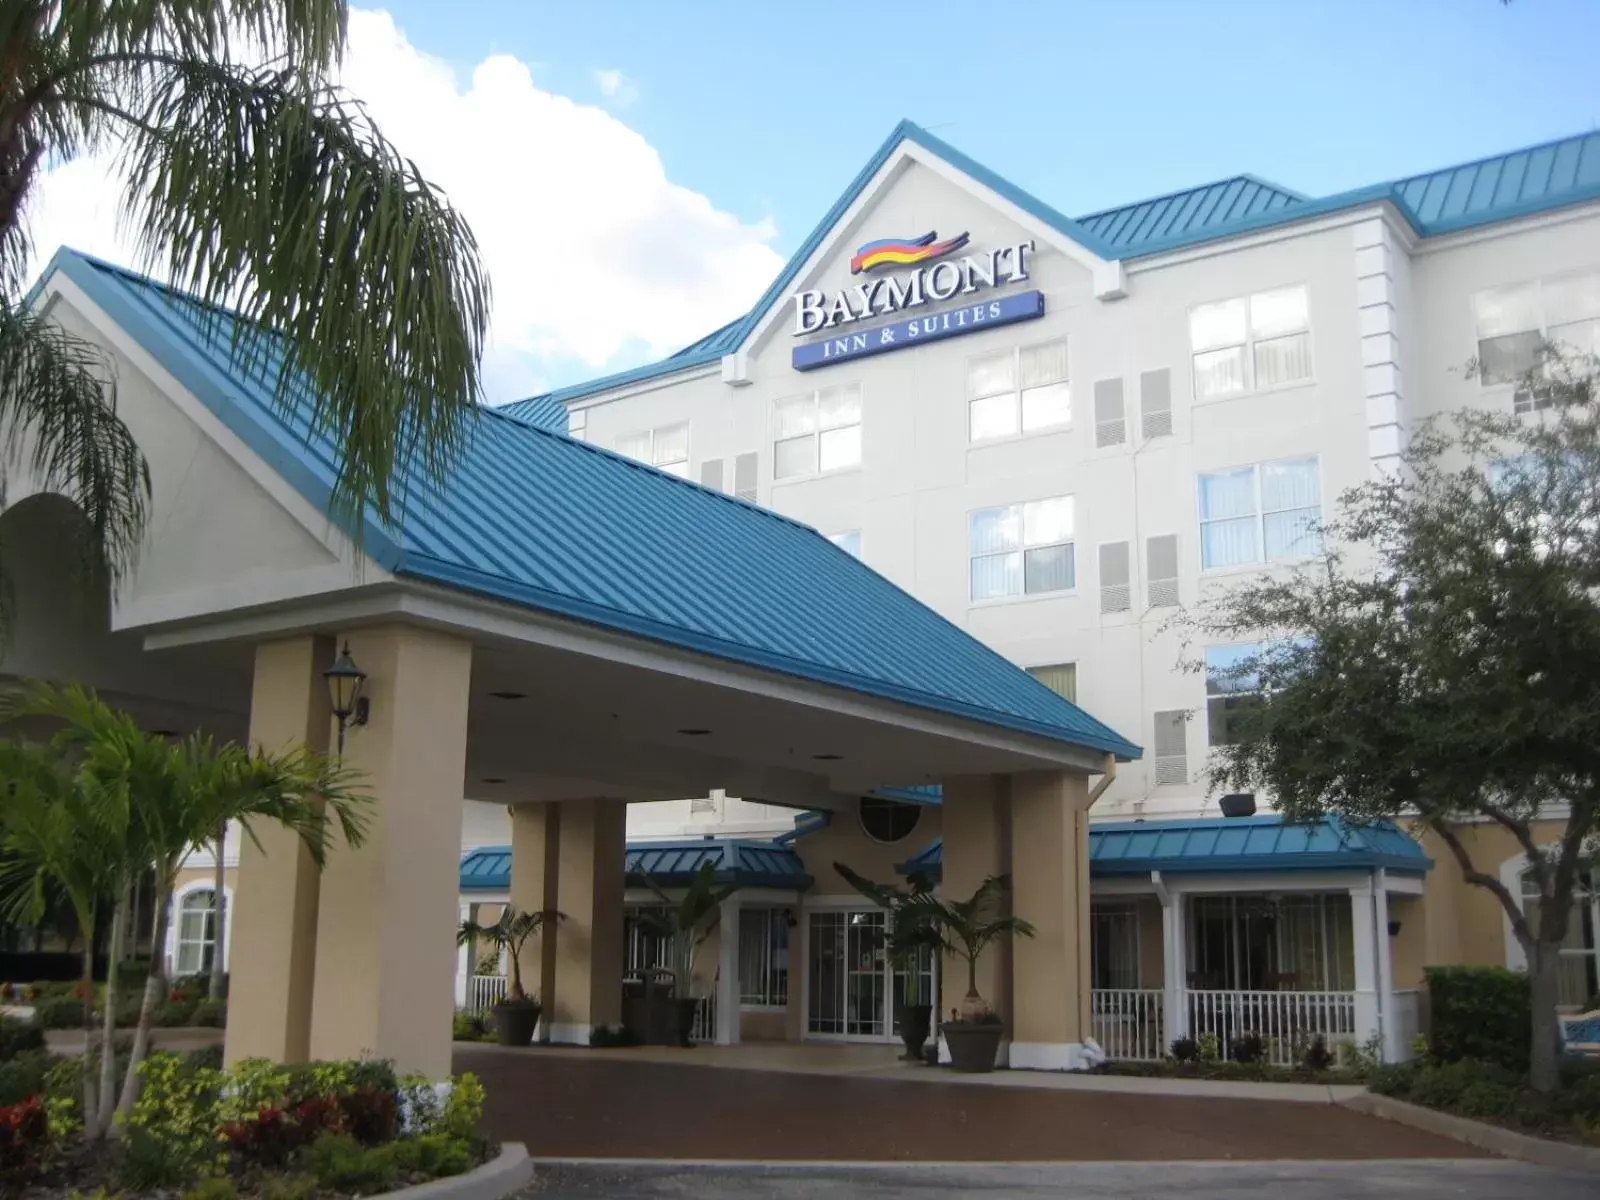 Property Building in Baymont by Wyndham Fort Myers Airport